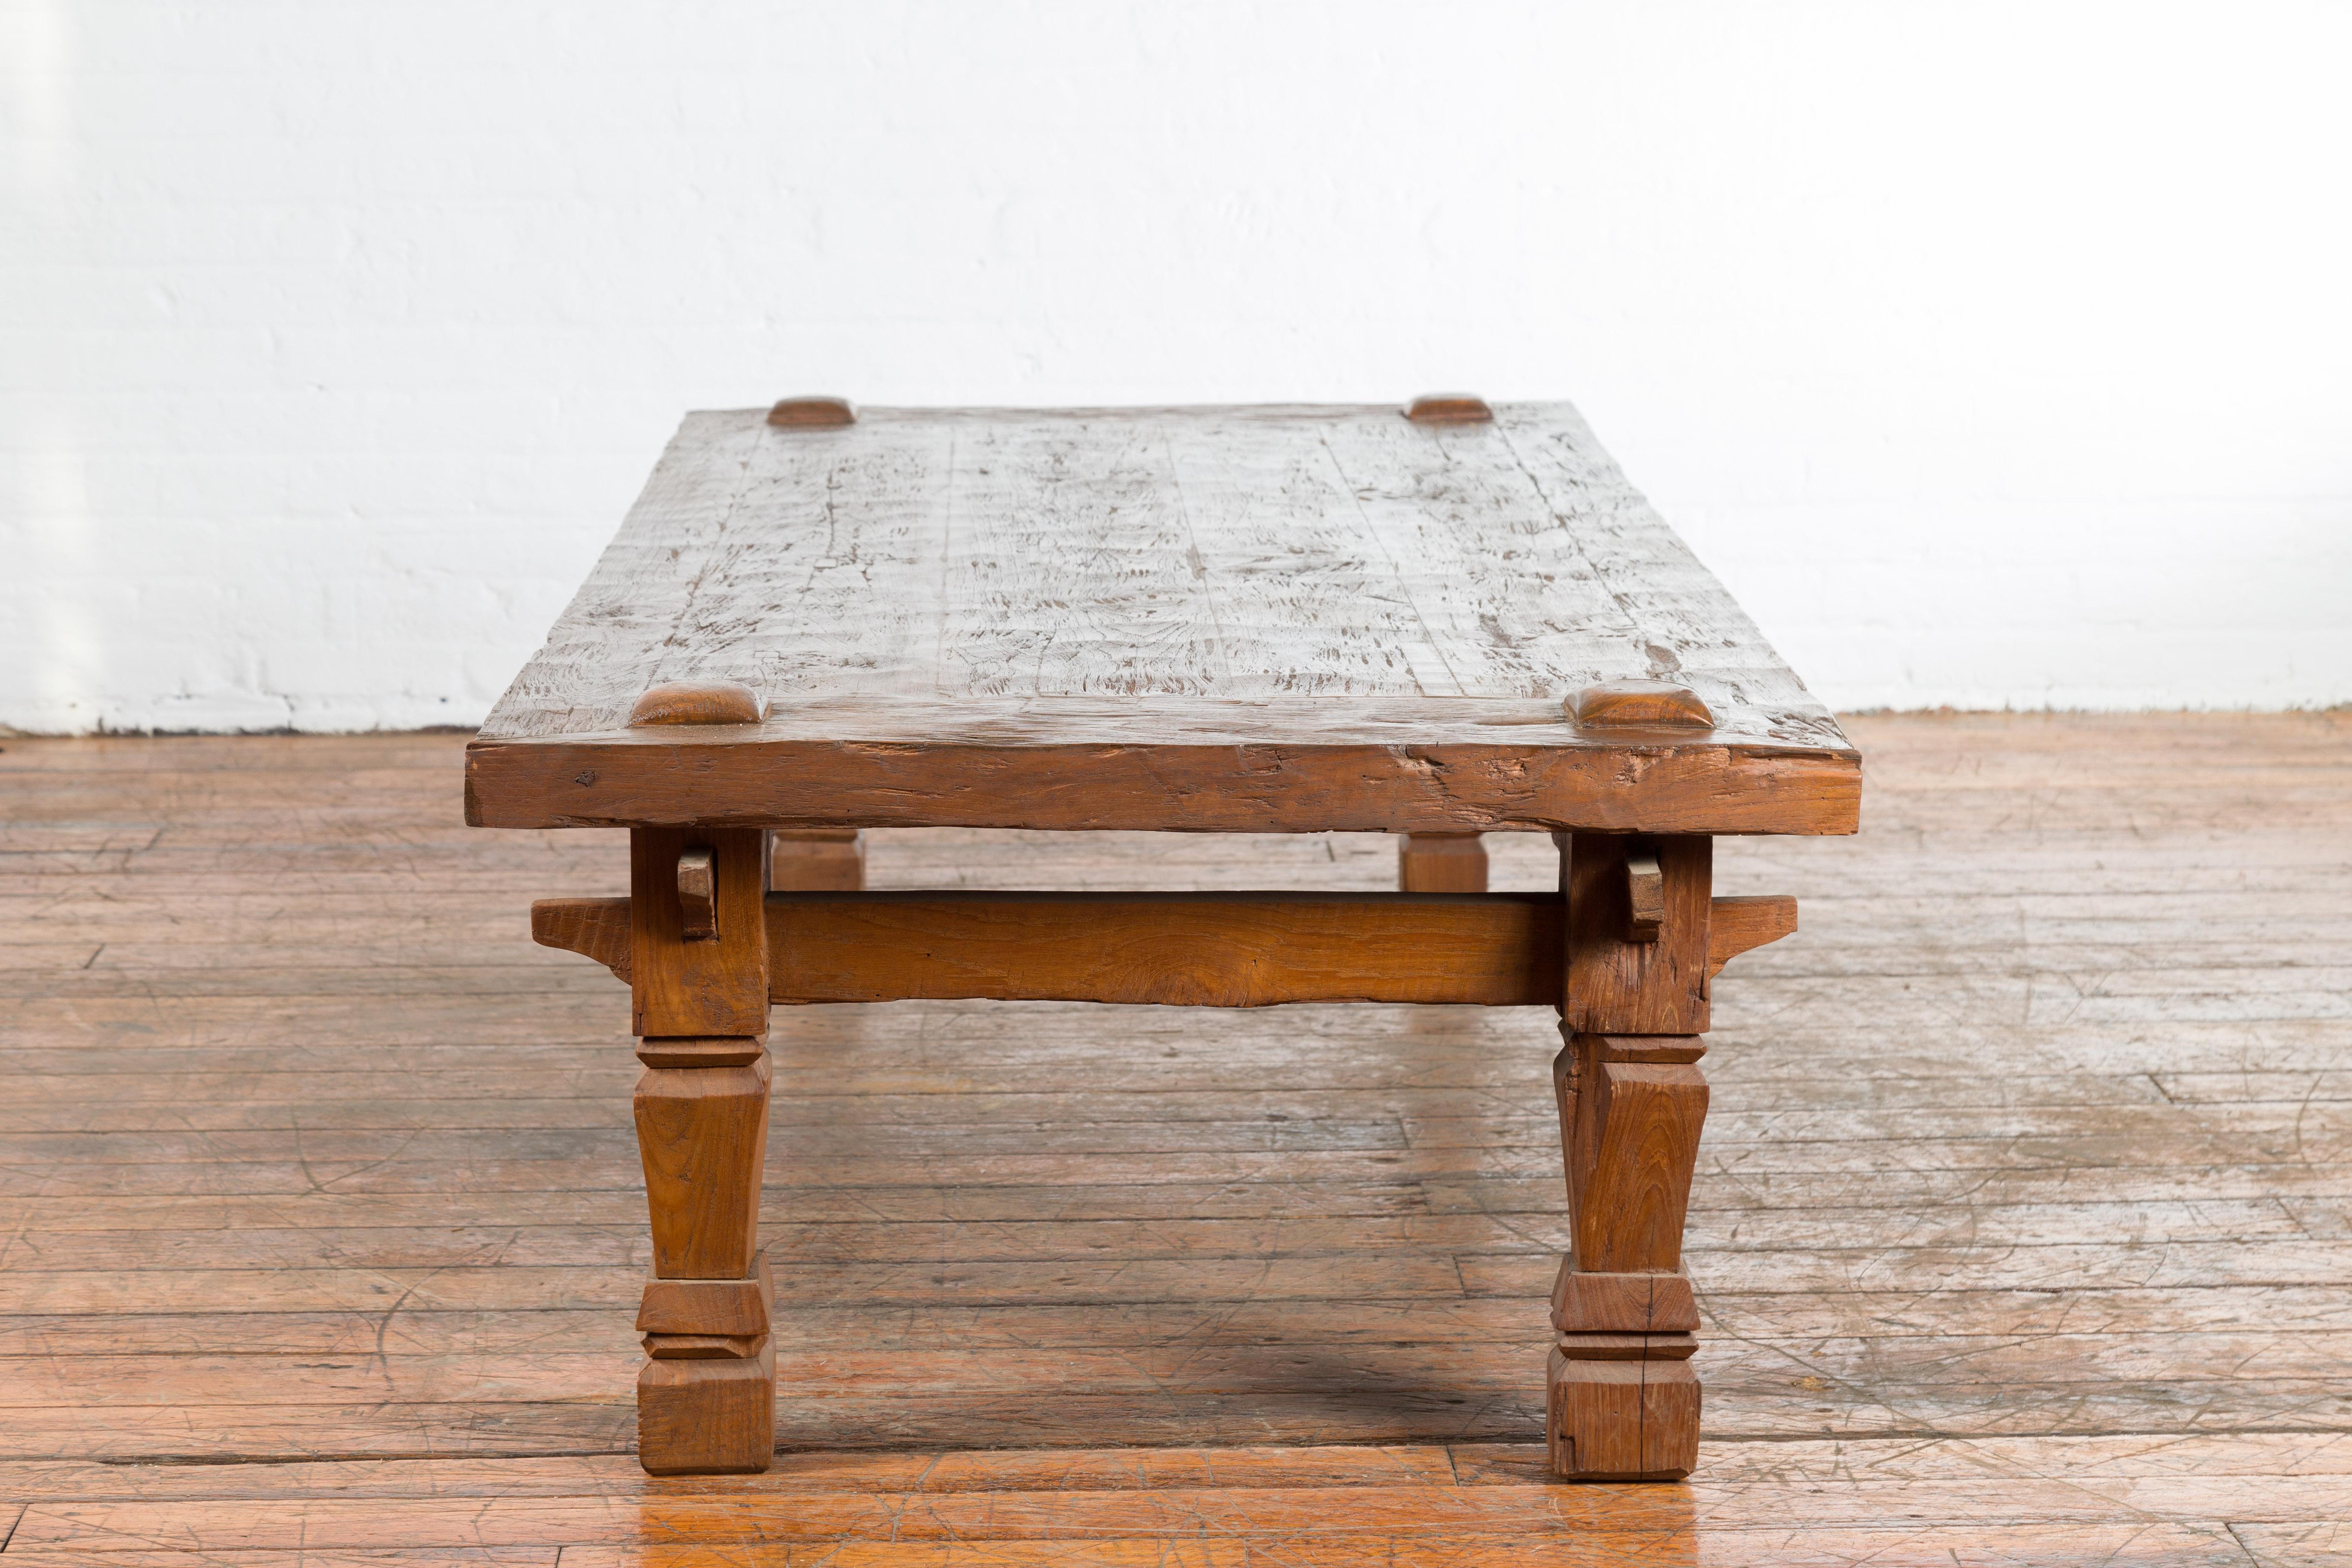 19th Century Indonesian Madurese Coffee Table with Carved Legs and Raised Joints For Sale 2